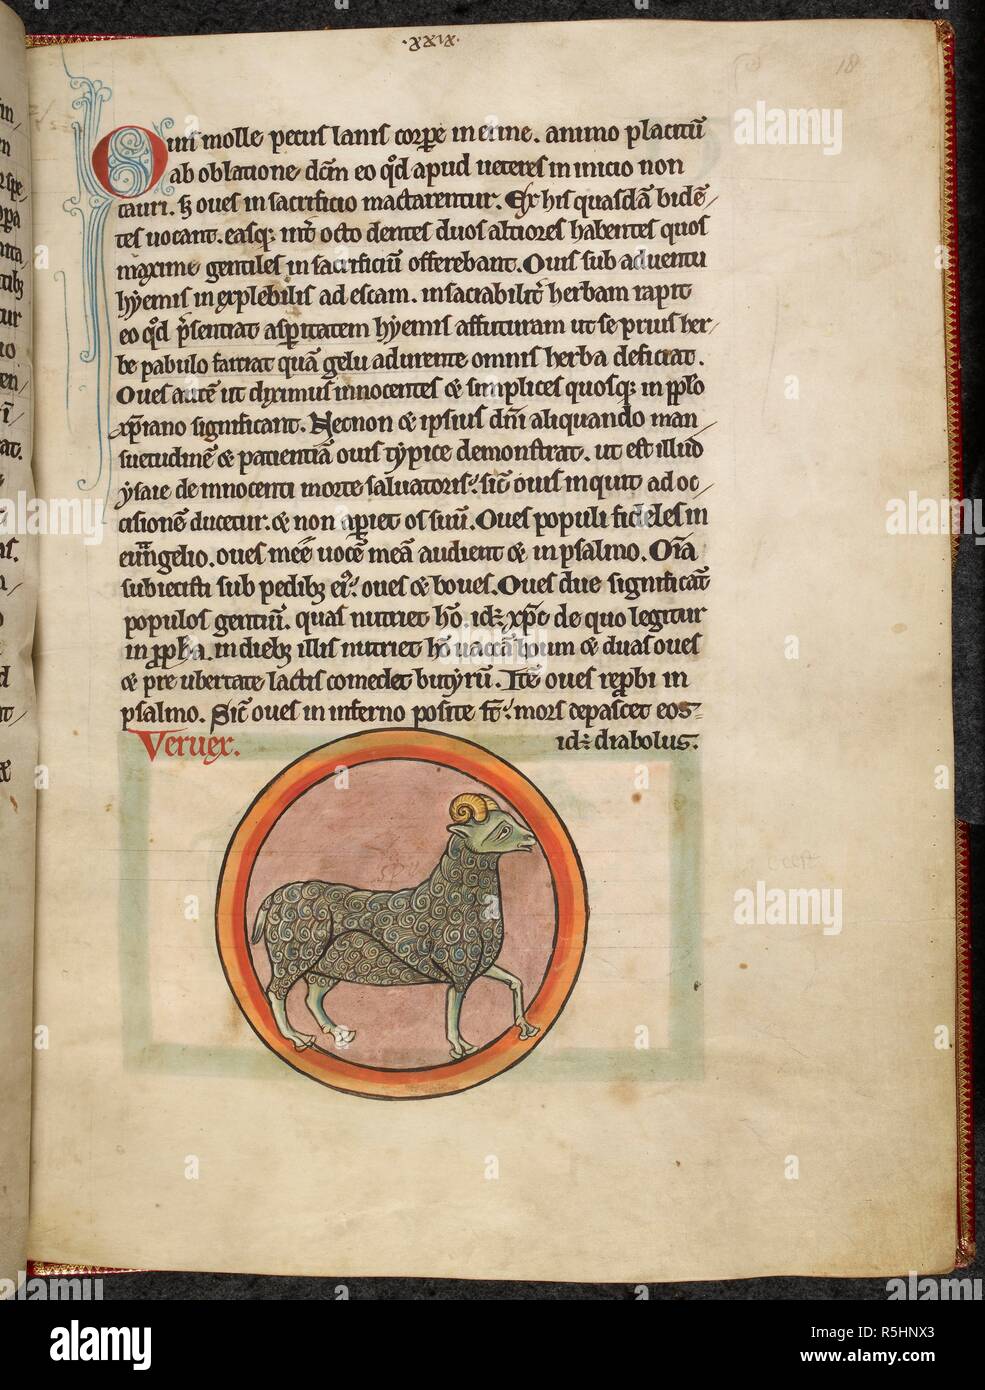 Illustration on page of manuscript. A horned sheep or goat. Ram. . Bestiary, with extracts from Giraldus Cambrensis on Irish birds. England, S. (Salisbury?). Bestiary, with extracts from Giraldus Cambrensis on Irish birds.  2nd quarter of the 13th century. Source: Harley 4751 f.18. Language: Latin. Stock Photo